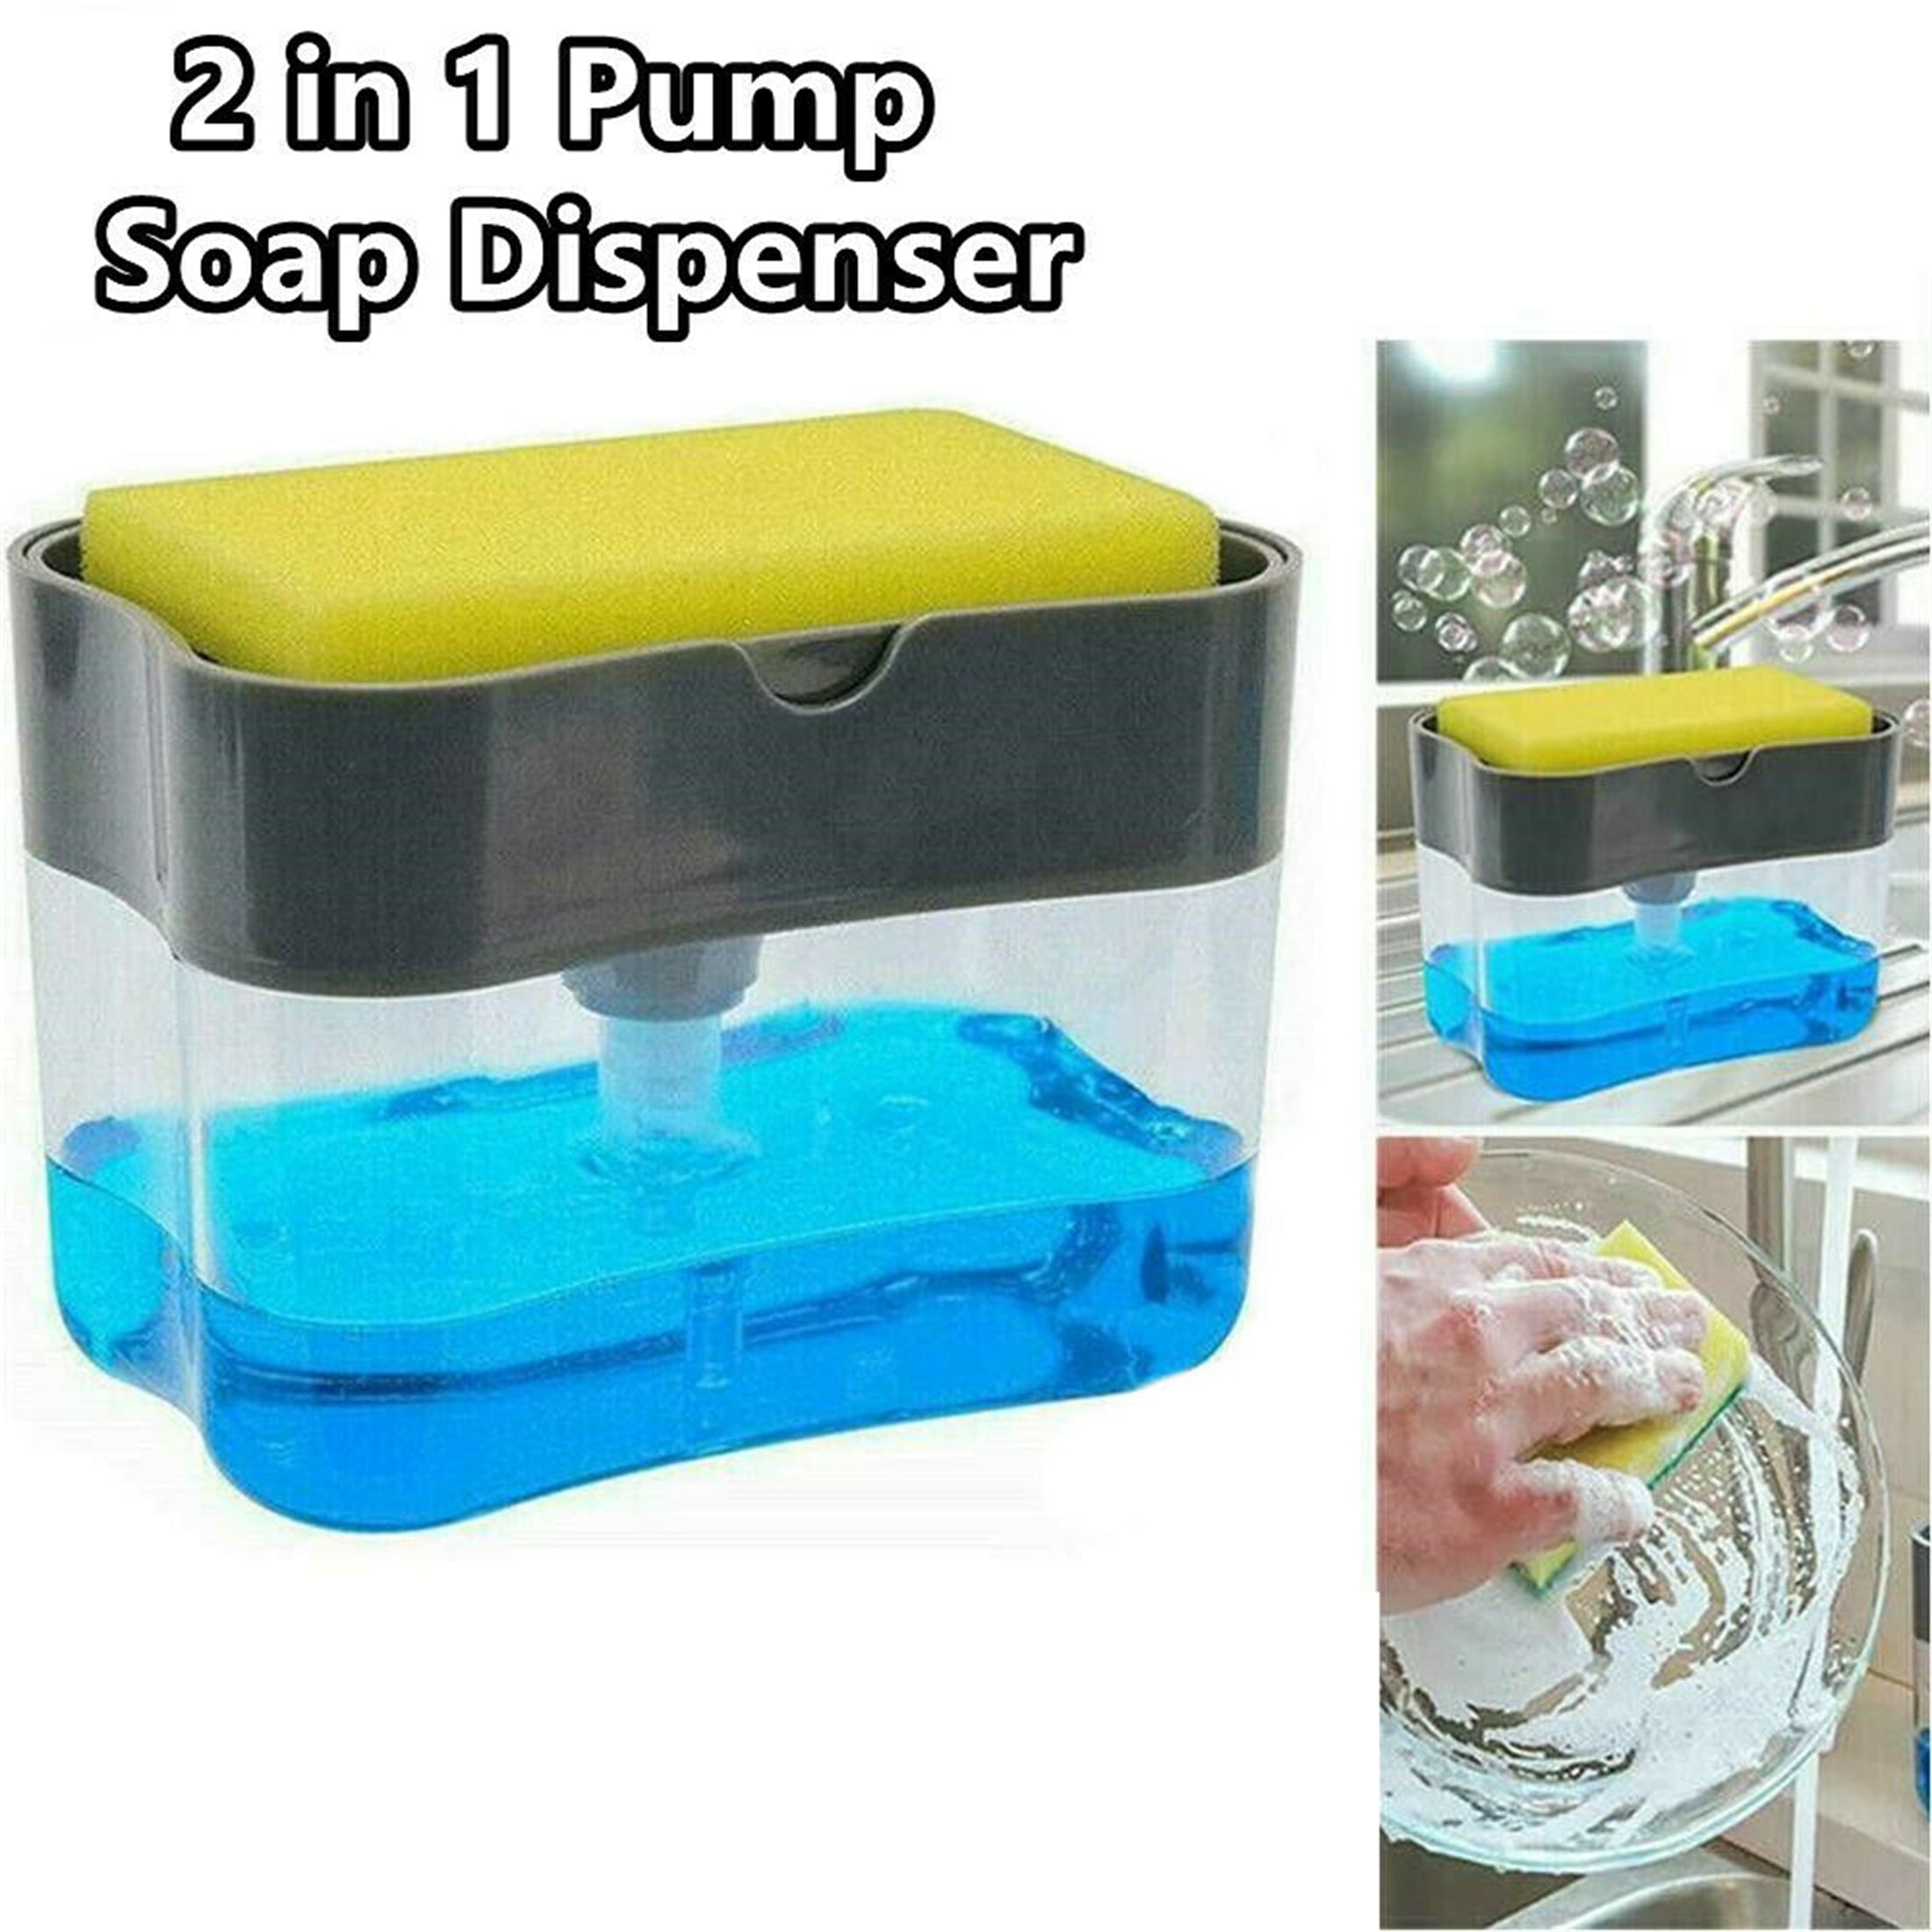  Dish Soap Dispenser, Sponge Caddy and Soap Dish for Kitchen  3in1 Kitchen Caddy, Clear Plastic : Home & Kitchen